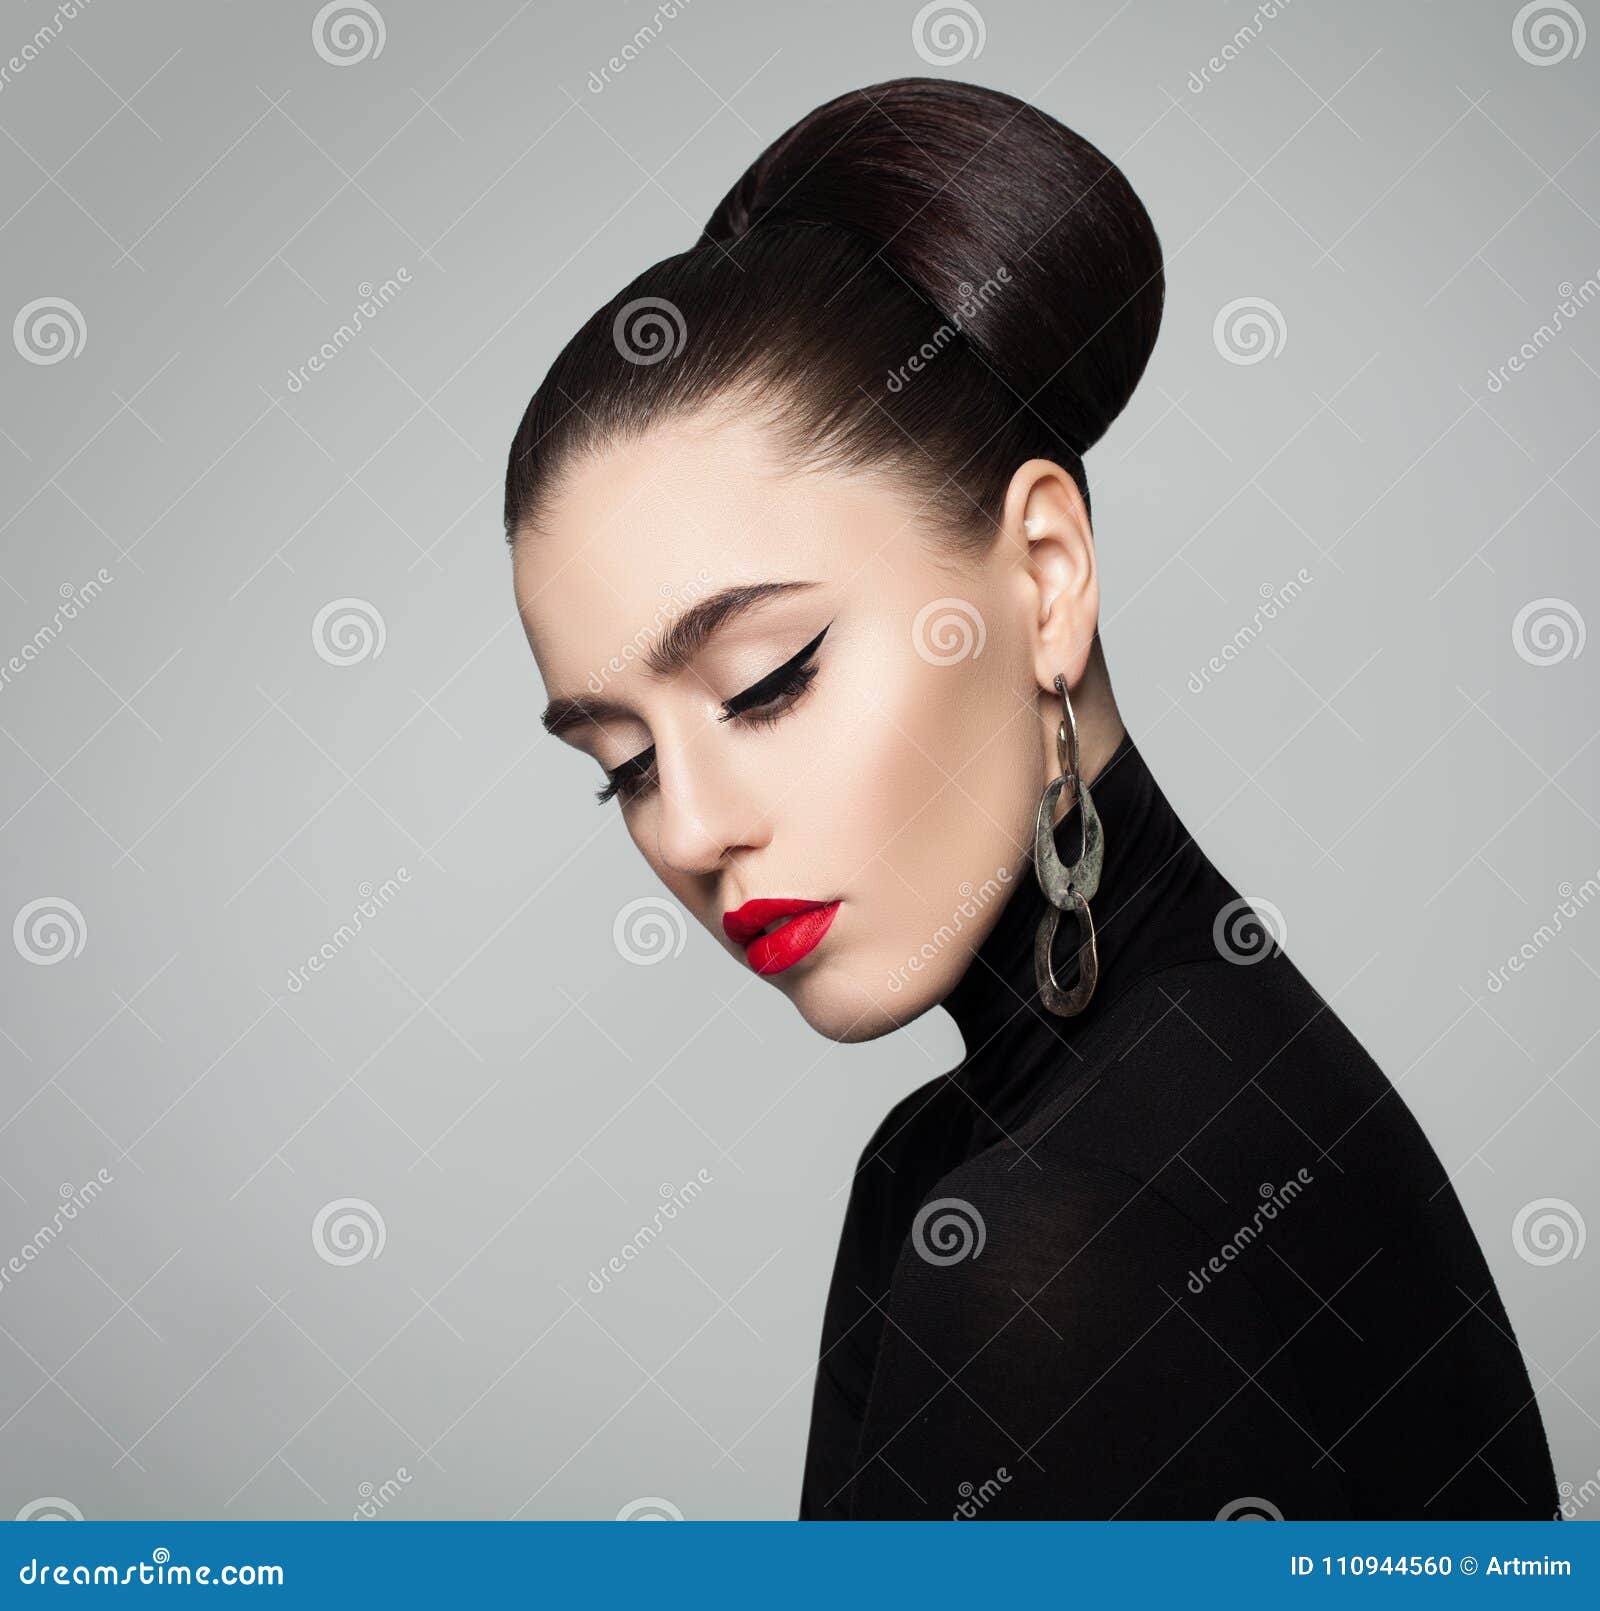 719 Black Woman Hair Bun Photos and Premium High Res Pictures  Getty Images